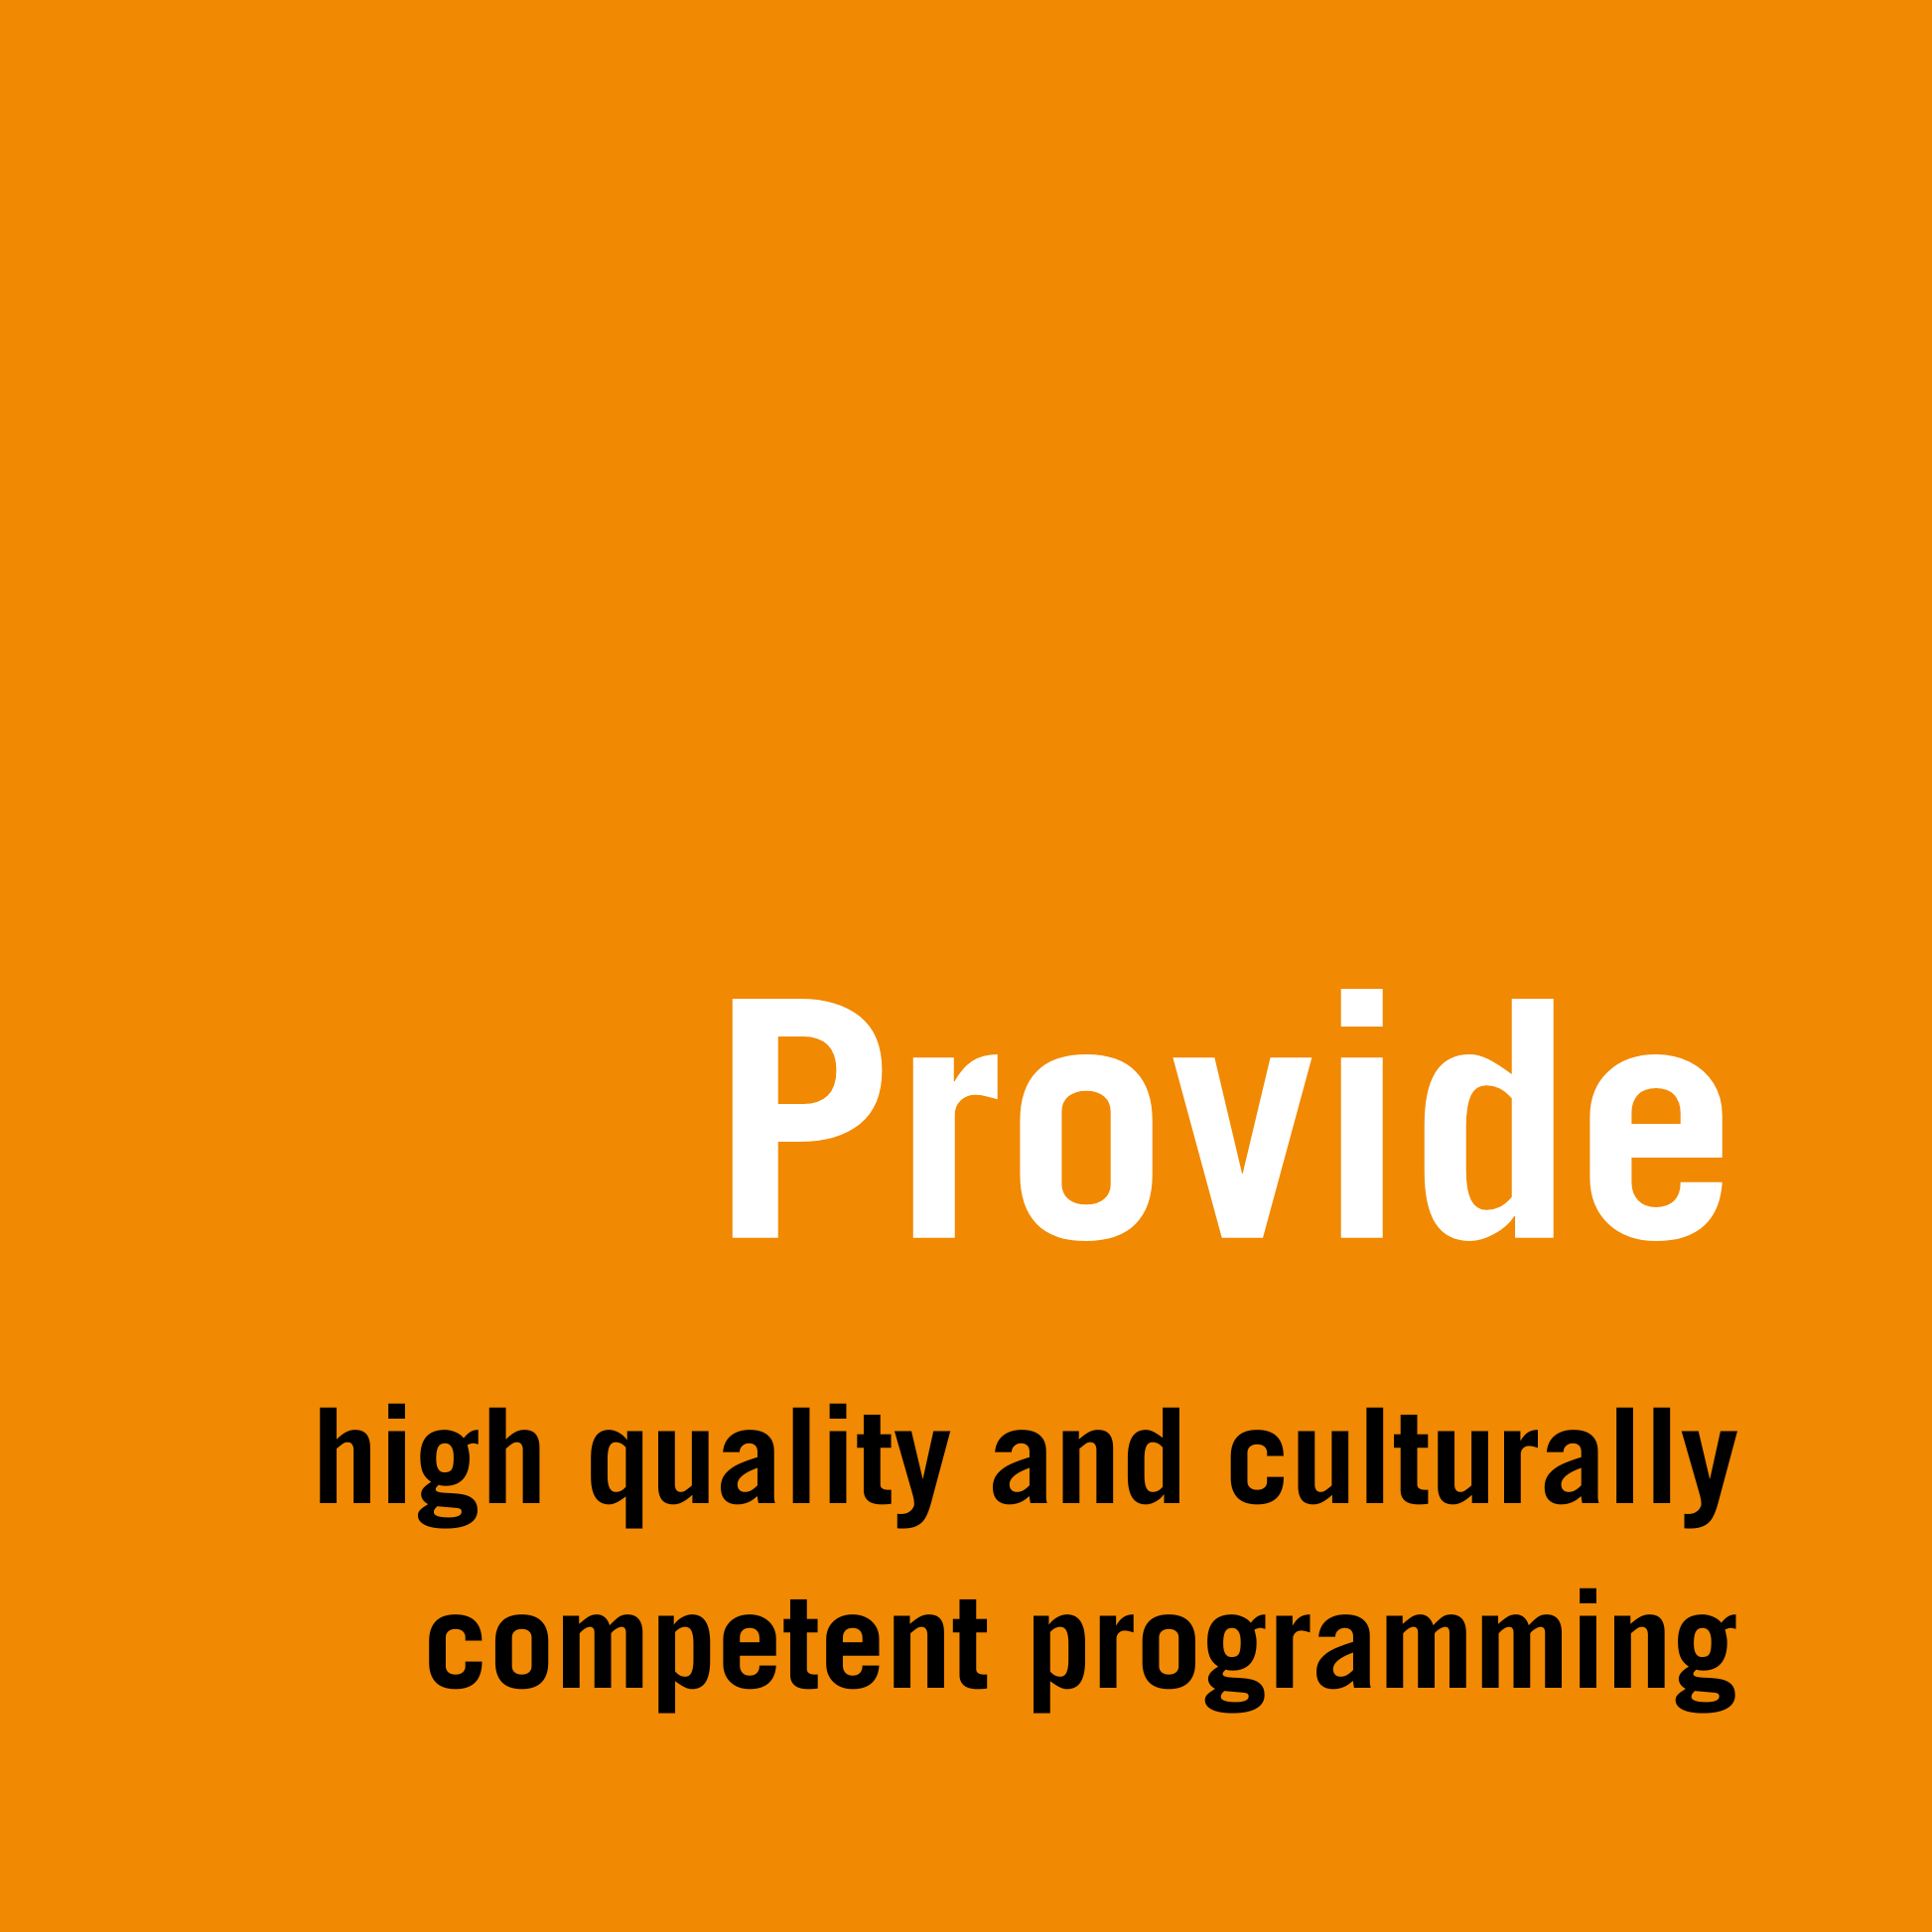 providing high quality and culturally competent programming